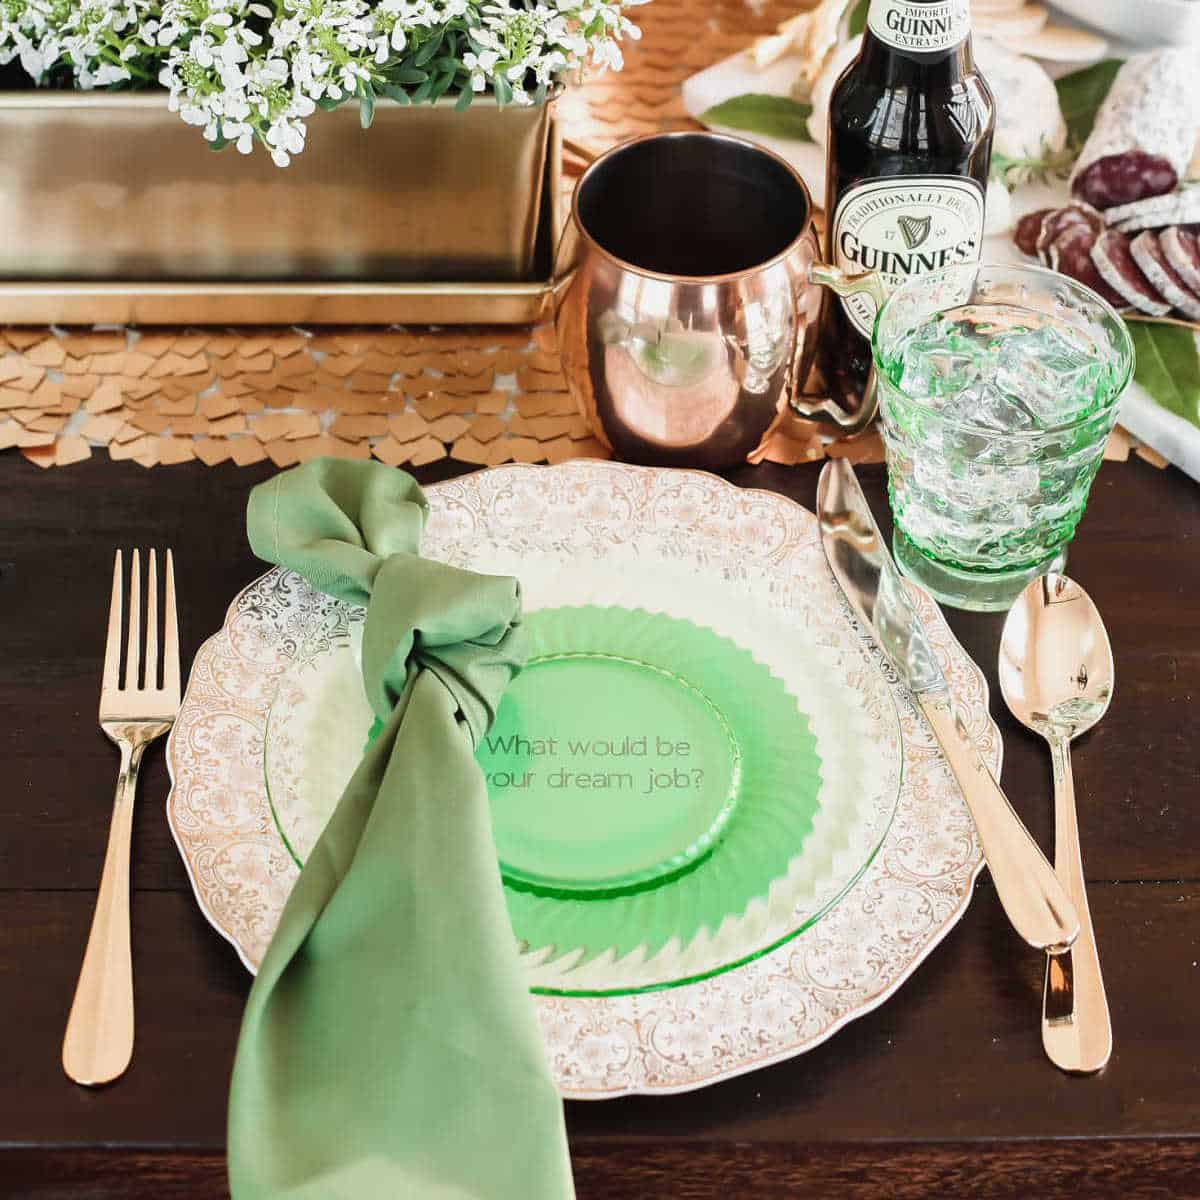 Irish themed dinner party for St Patrick’s Day